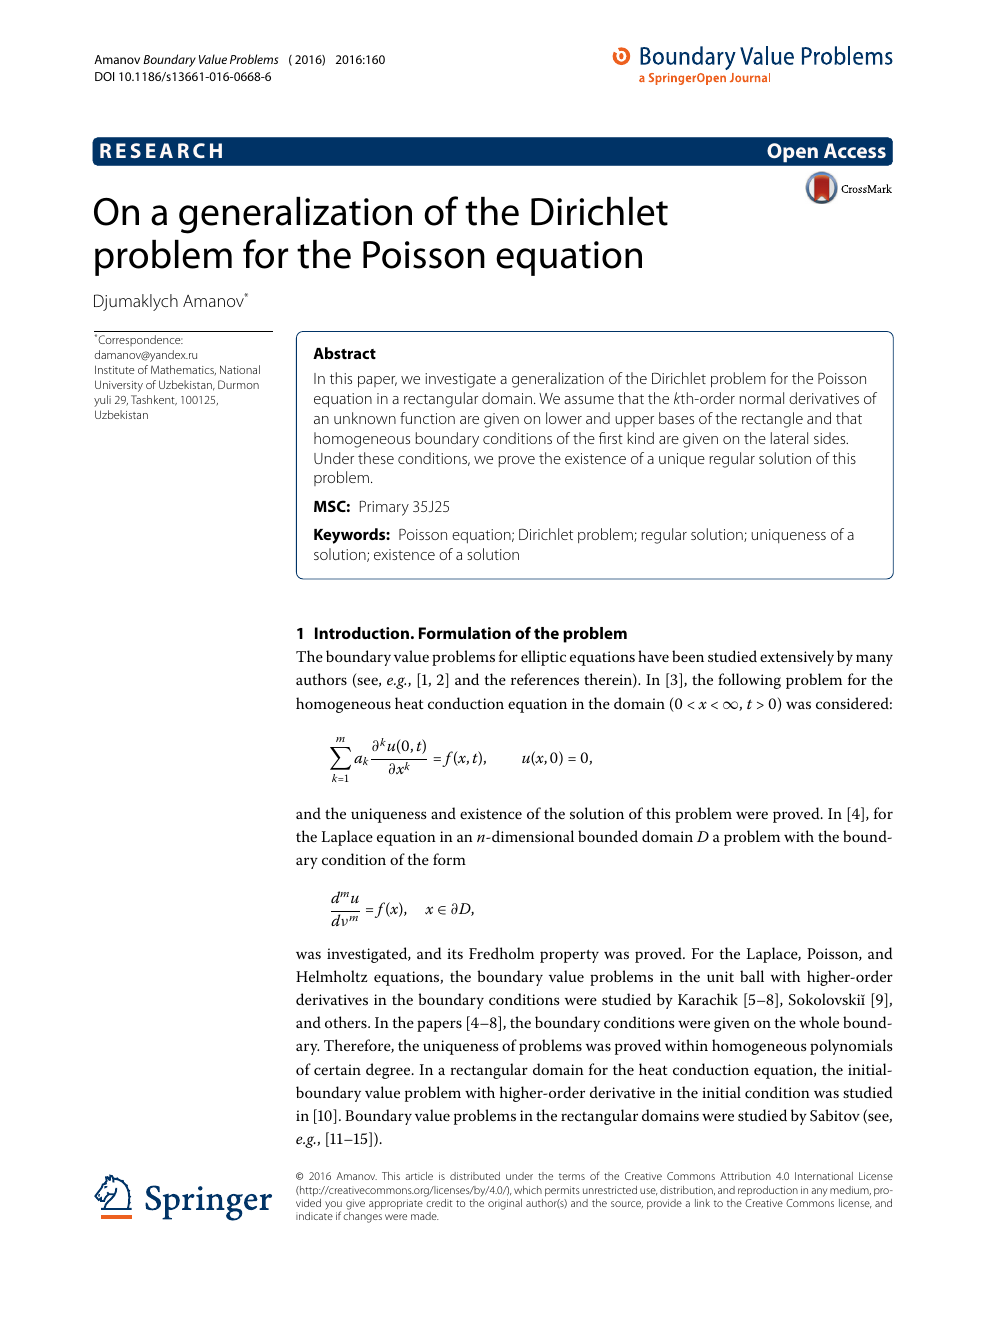 On A Generalization Of The Dirichlet Problem For The Poisson Equation Topic Of Research Paper In Mathematics Download Scholarly Article Pdf And Read For Free On Cyberleninka Open Science Hub